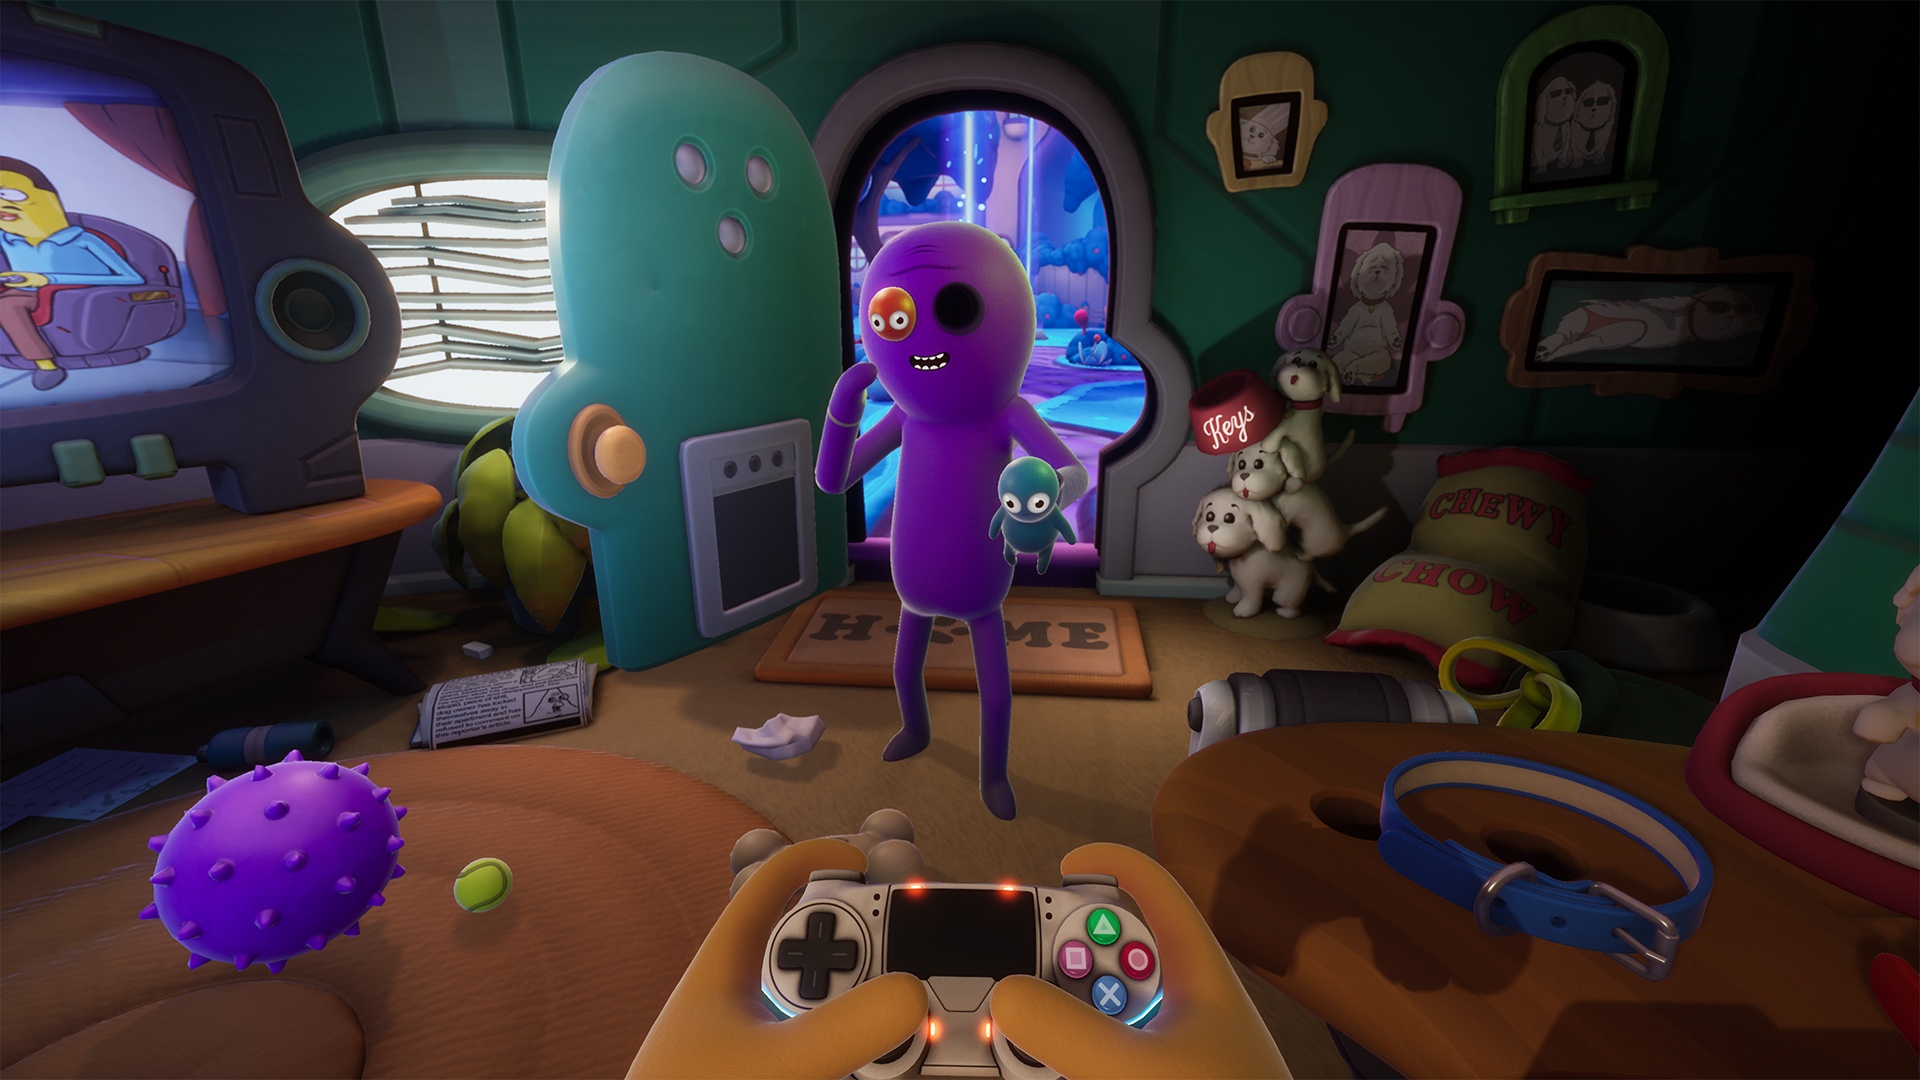 Action, adventure, Comedy, Gearbox Publishing, Gearbox Software, indie, PS4, PS4 Review, Rating 9/10, Squanch Games, Trover Saves the Universe, Trover Saves the Universe Review, VR